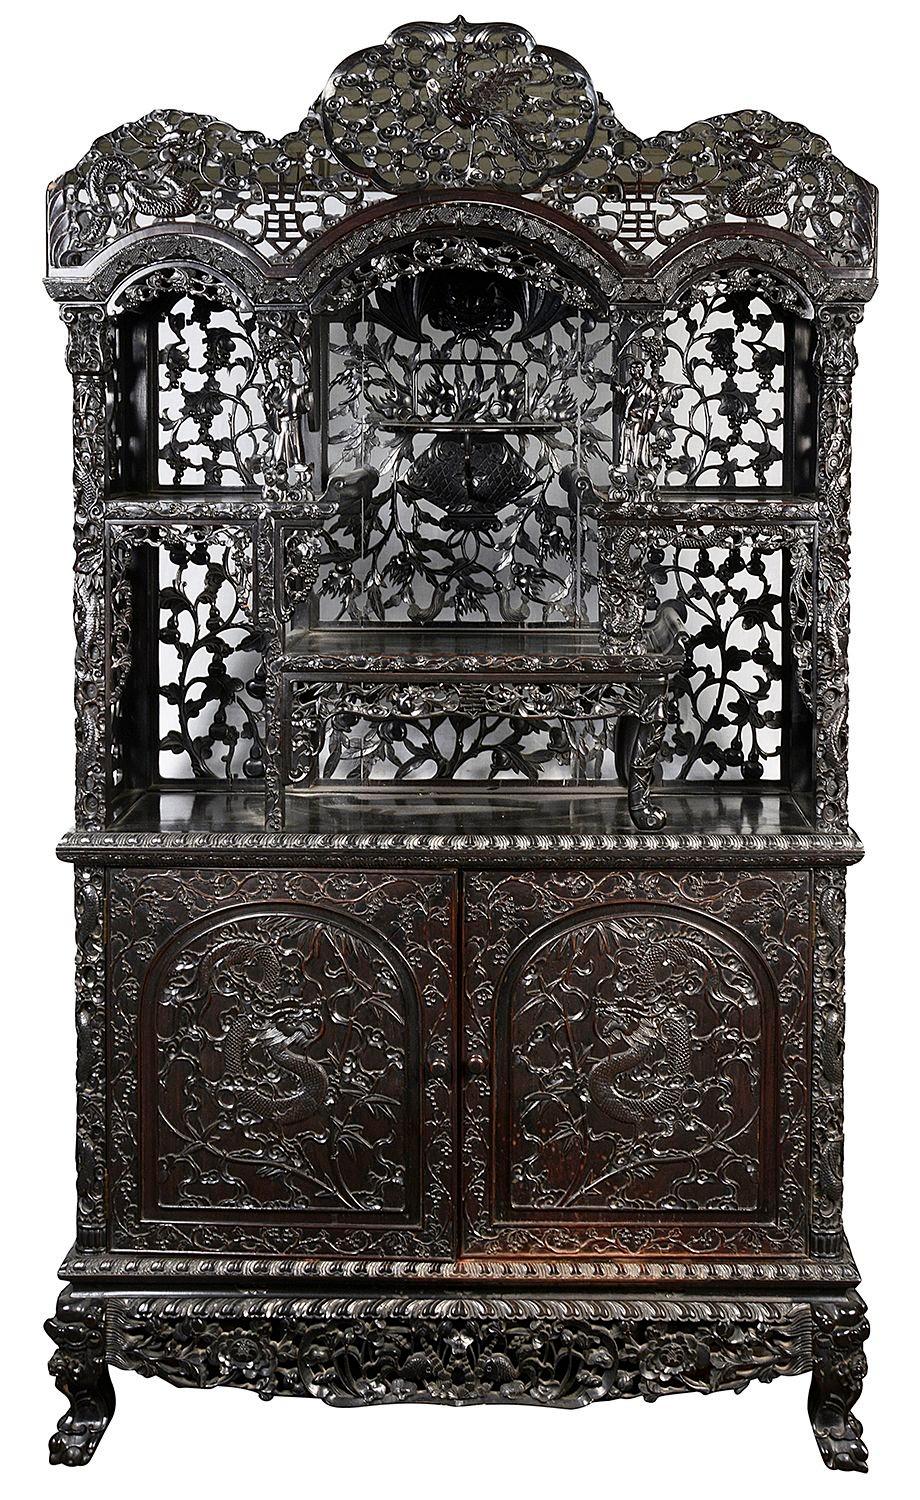 A fine quality 19th Century Chinese hardwood hand carved side cabinet. Having this wonderful shaped cornice with mythical carved Dragons and an exotic bird among clouds. Below are open shelves again with wonderful hand carved and pierced scrolling